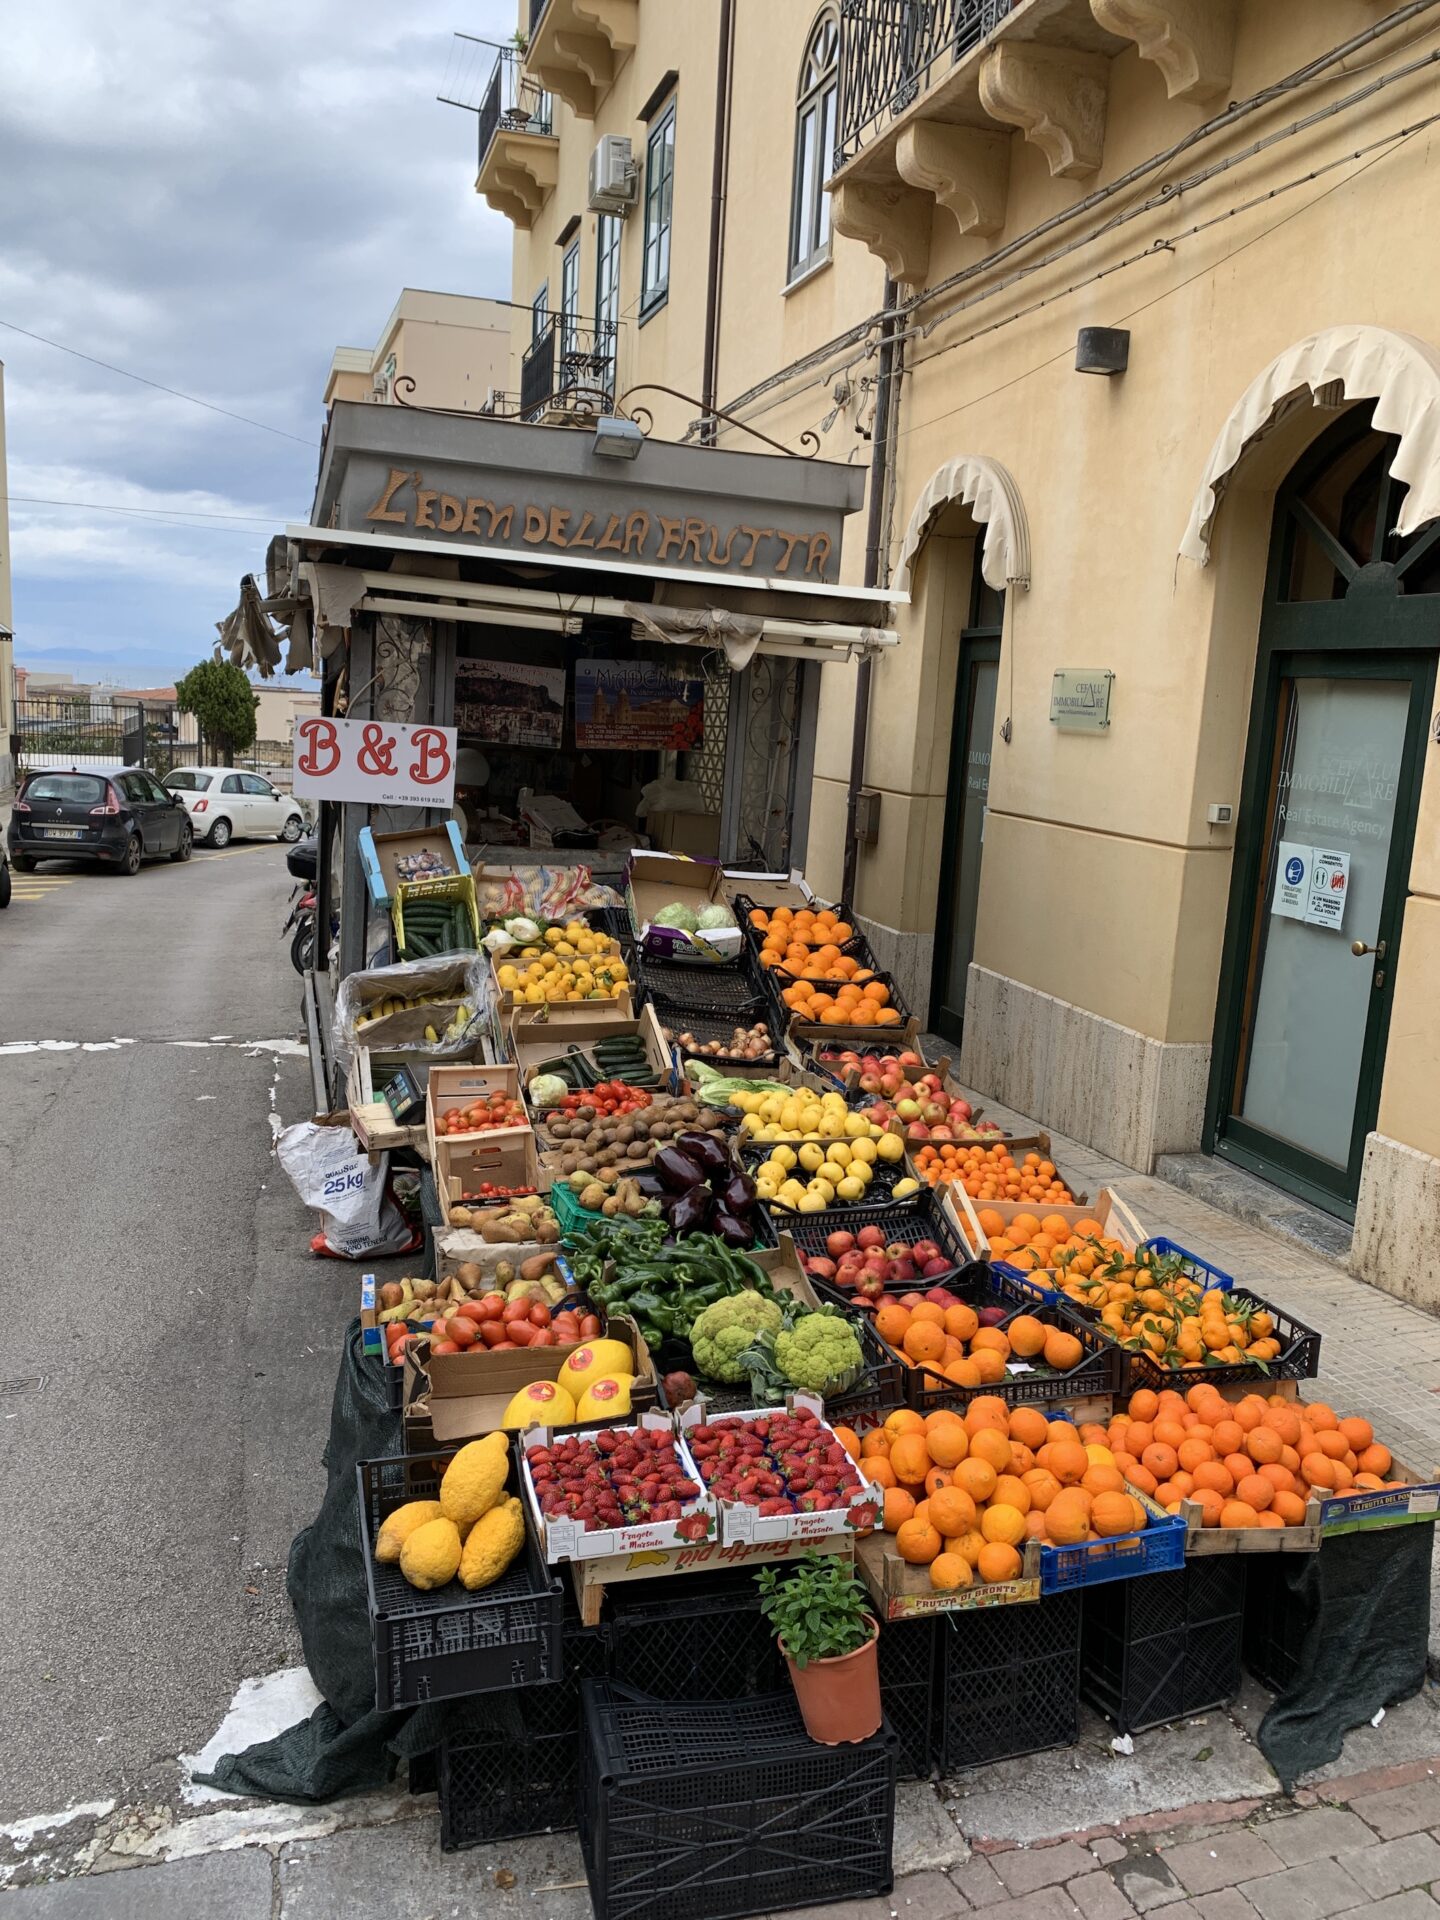 Obststand in Cefalù